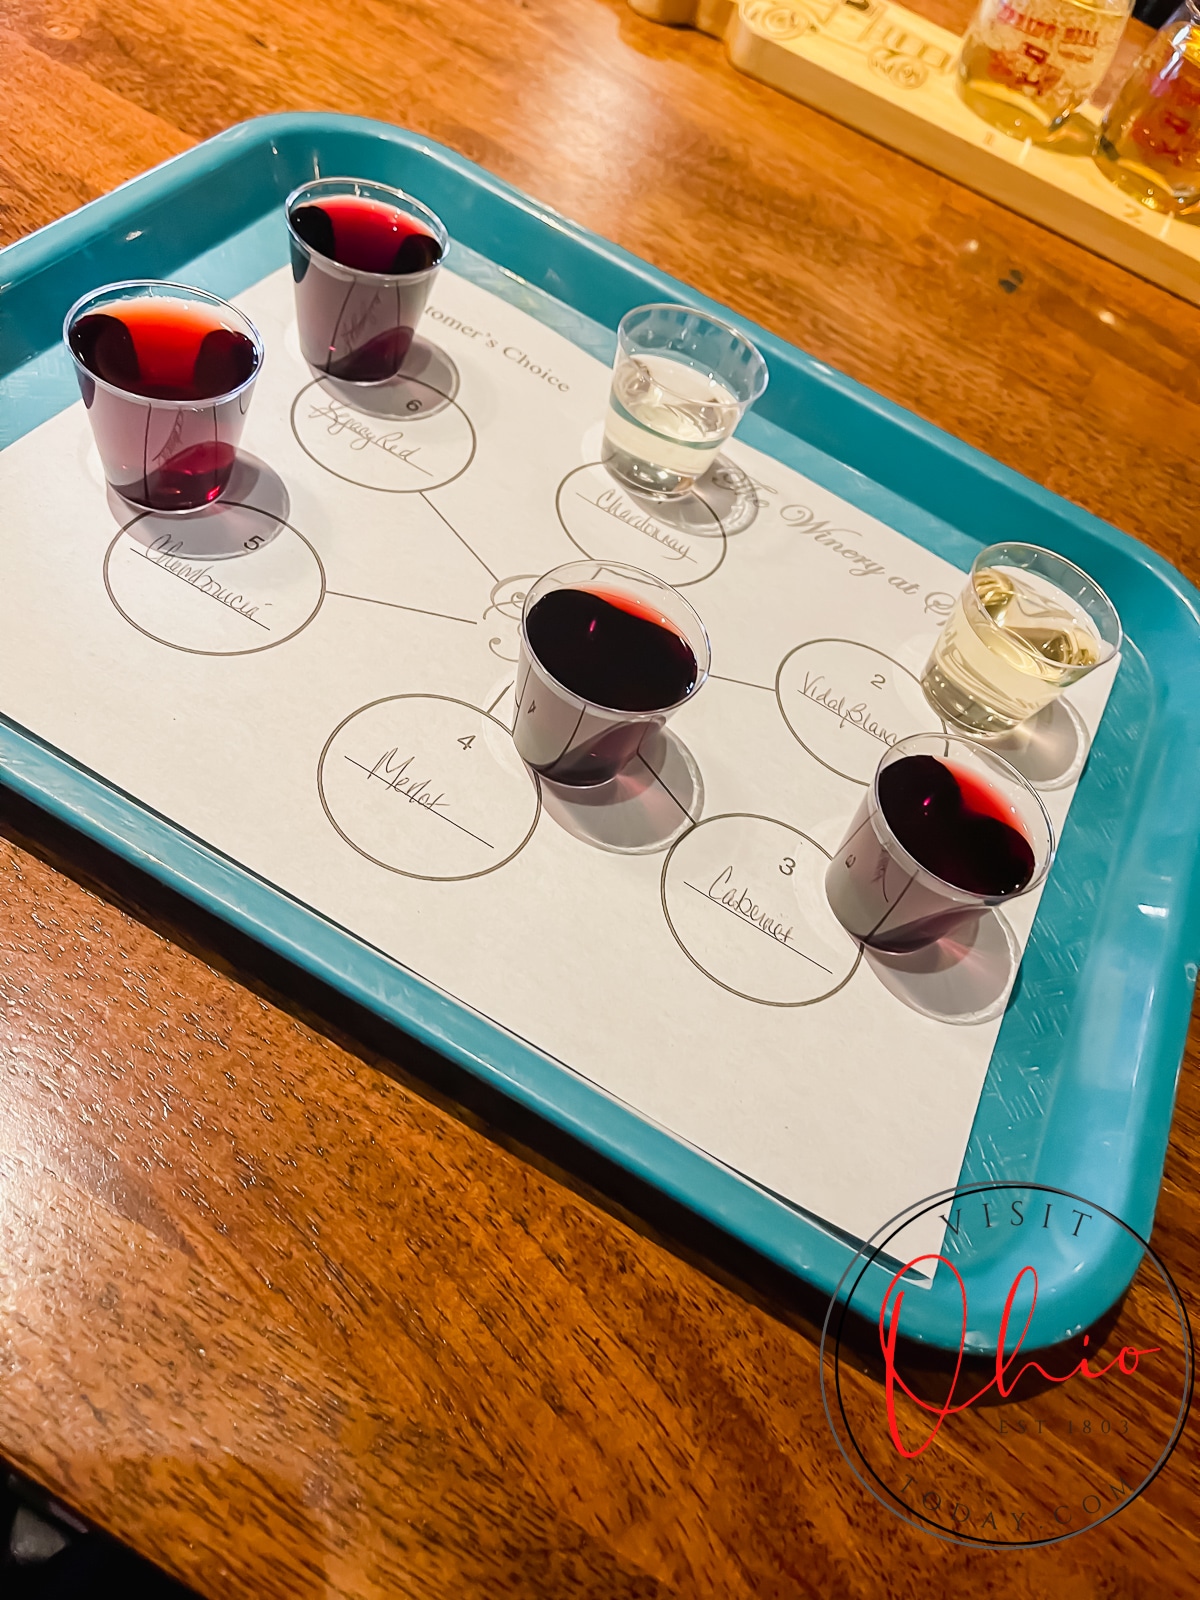 blue tray with a white paper with writing and plastic shot glasses filled with wine